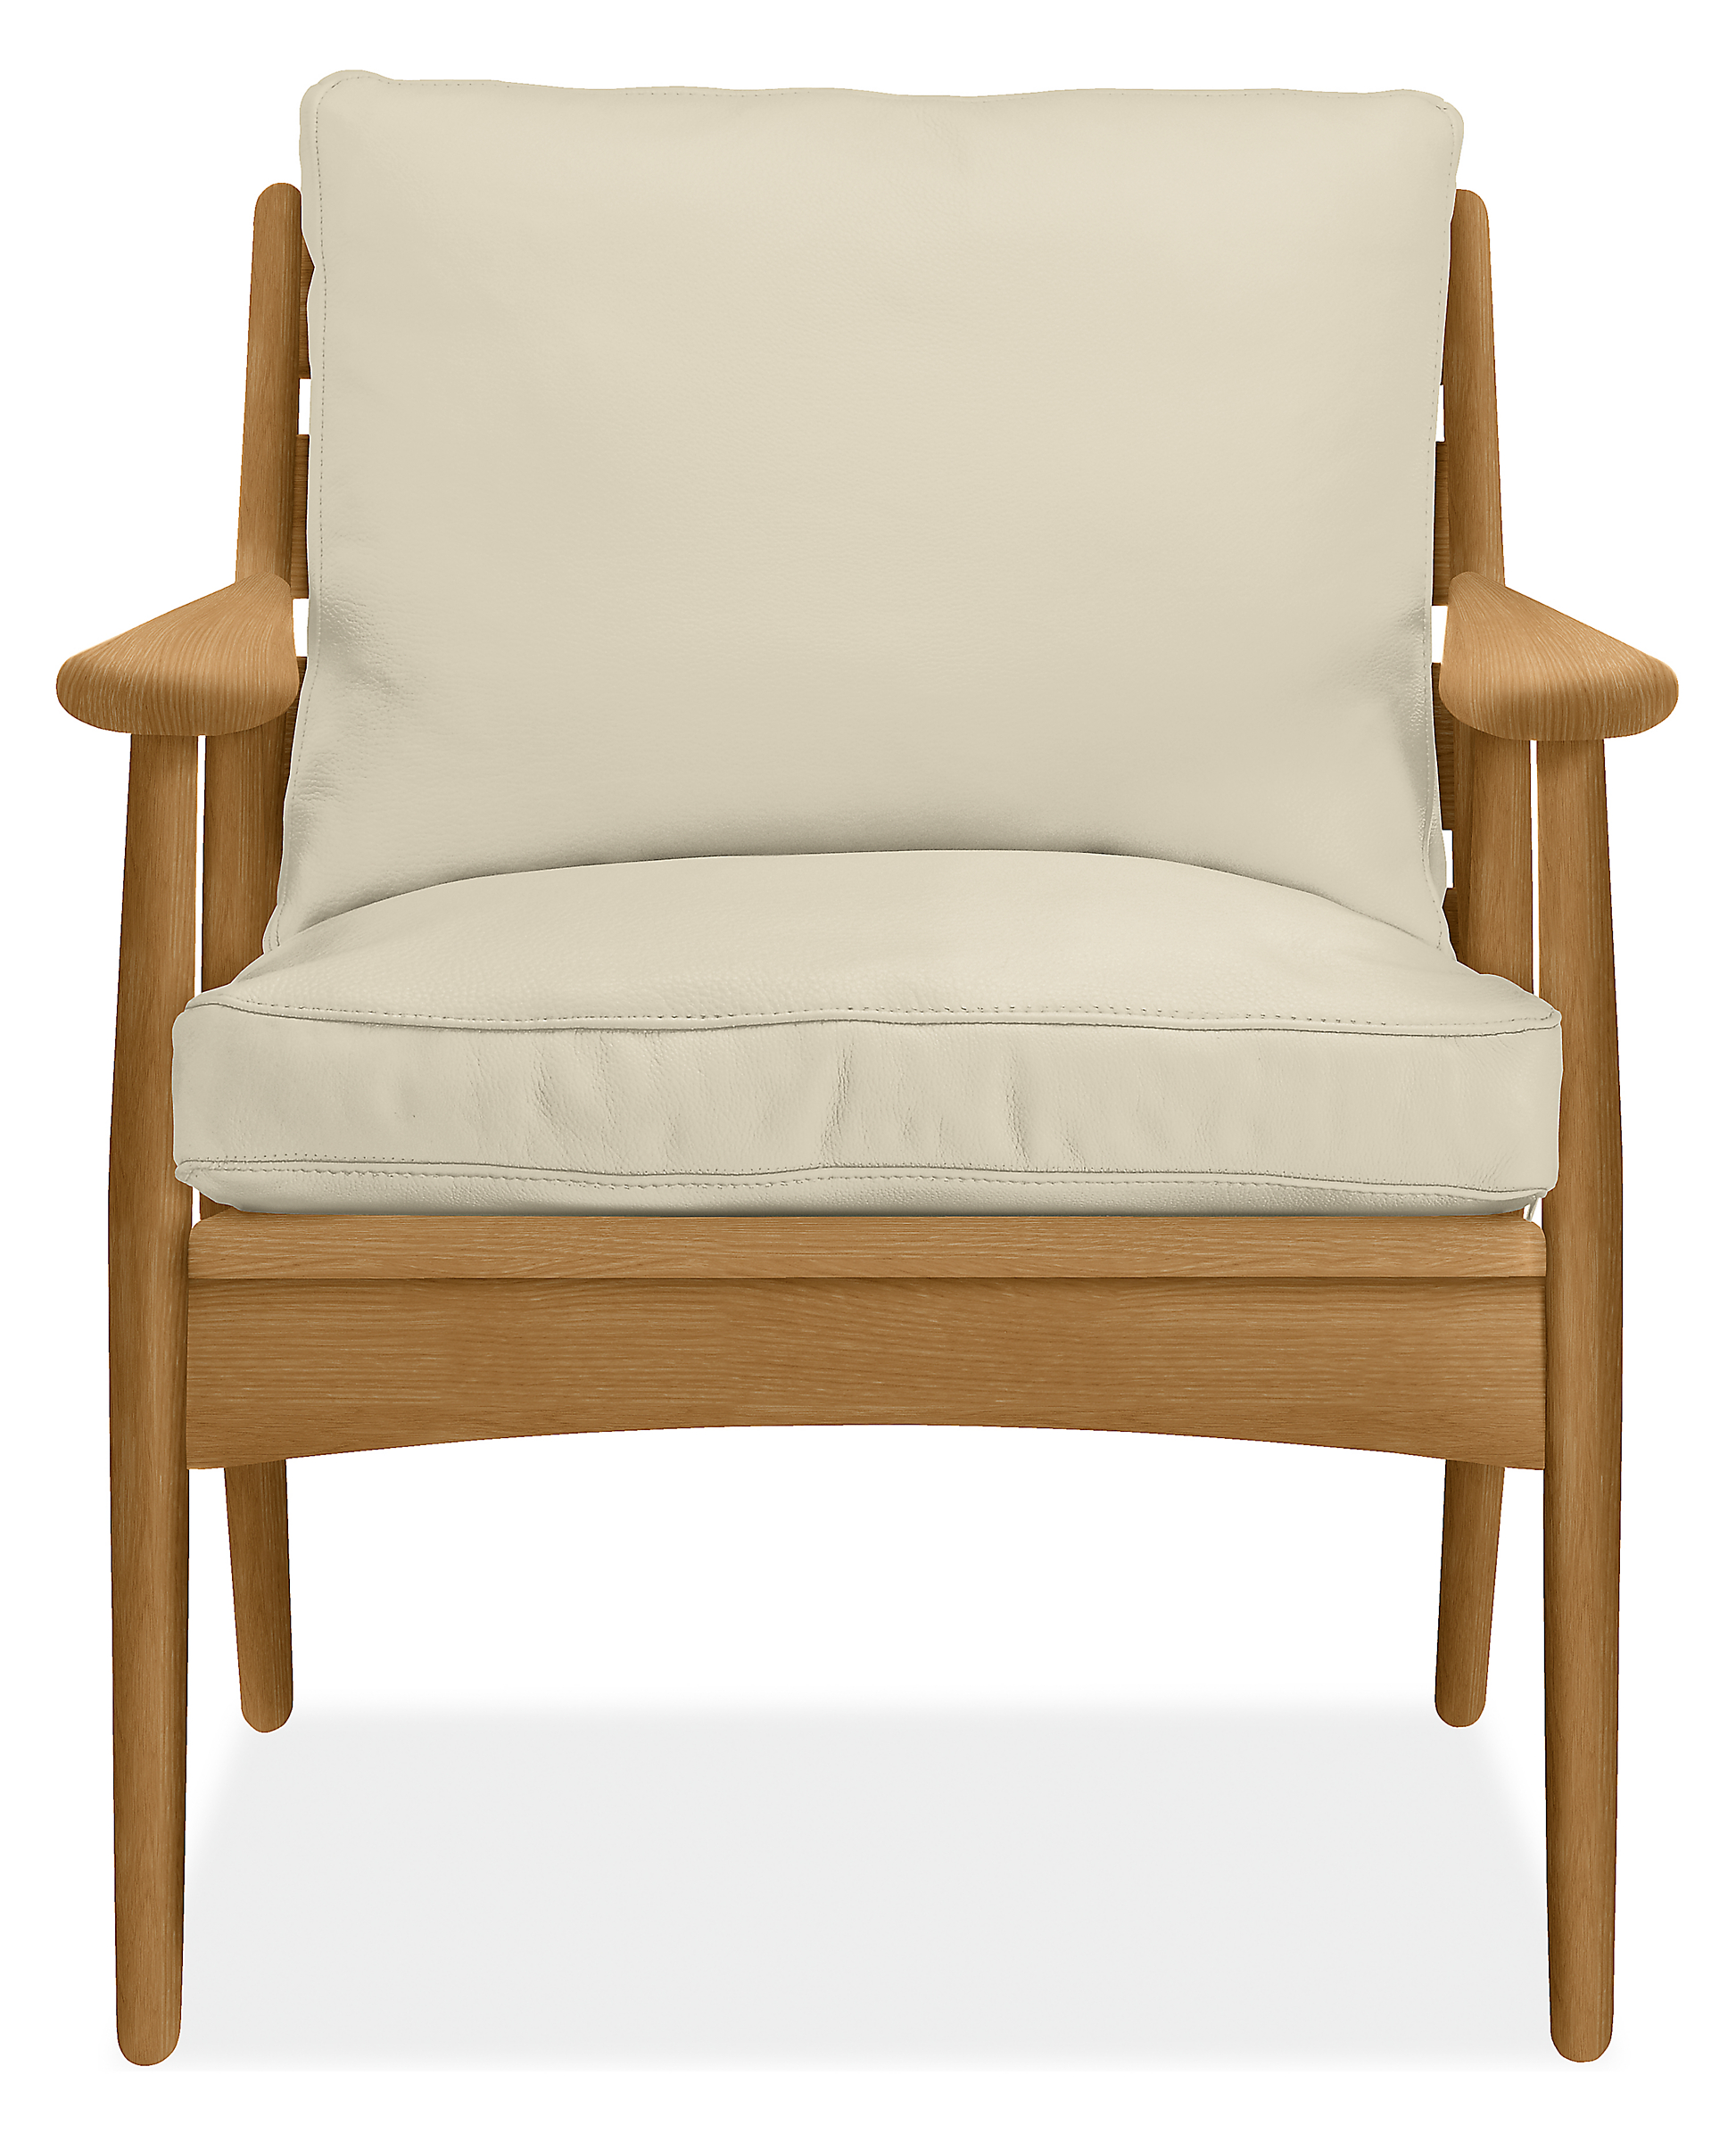 Front view of Ericson Lounge Chair in Urbino Leather.